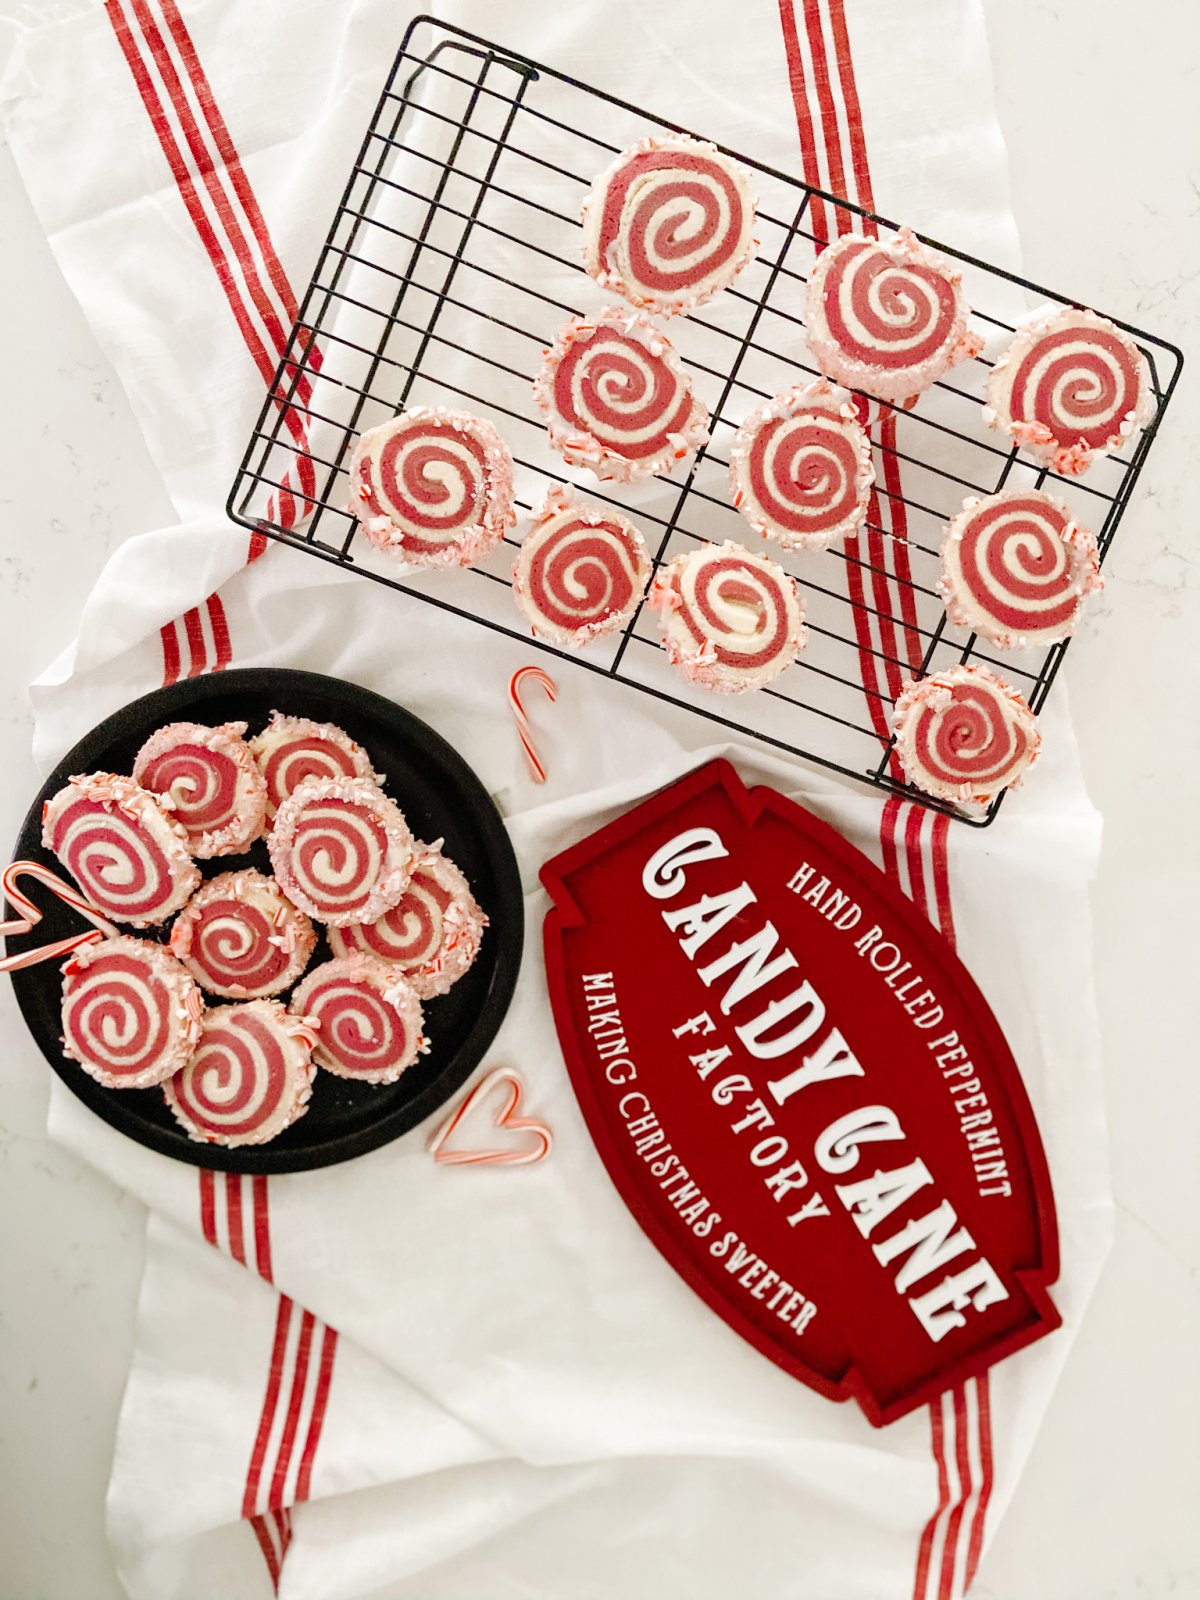 Candy Cane Frosted Swirl Cookies. Take the classic candy cane cookie and give it a modern update by rolling it and frosting it with crushed candy canes!